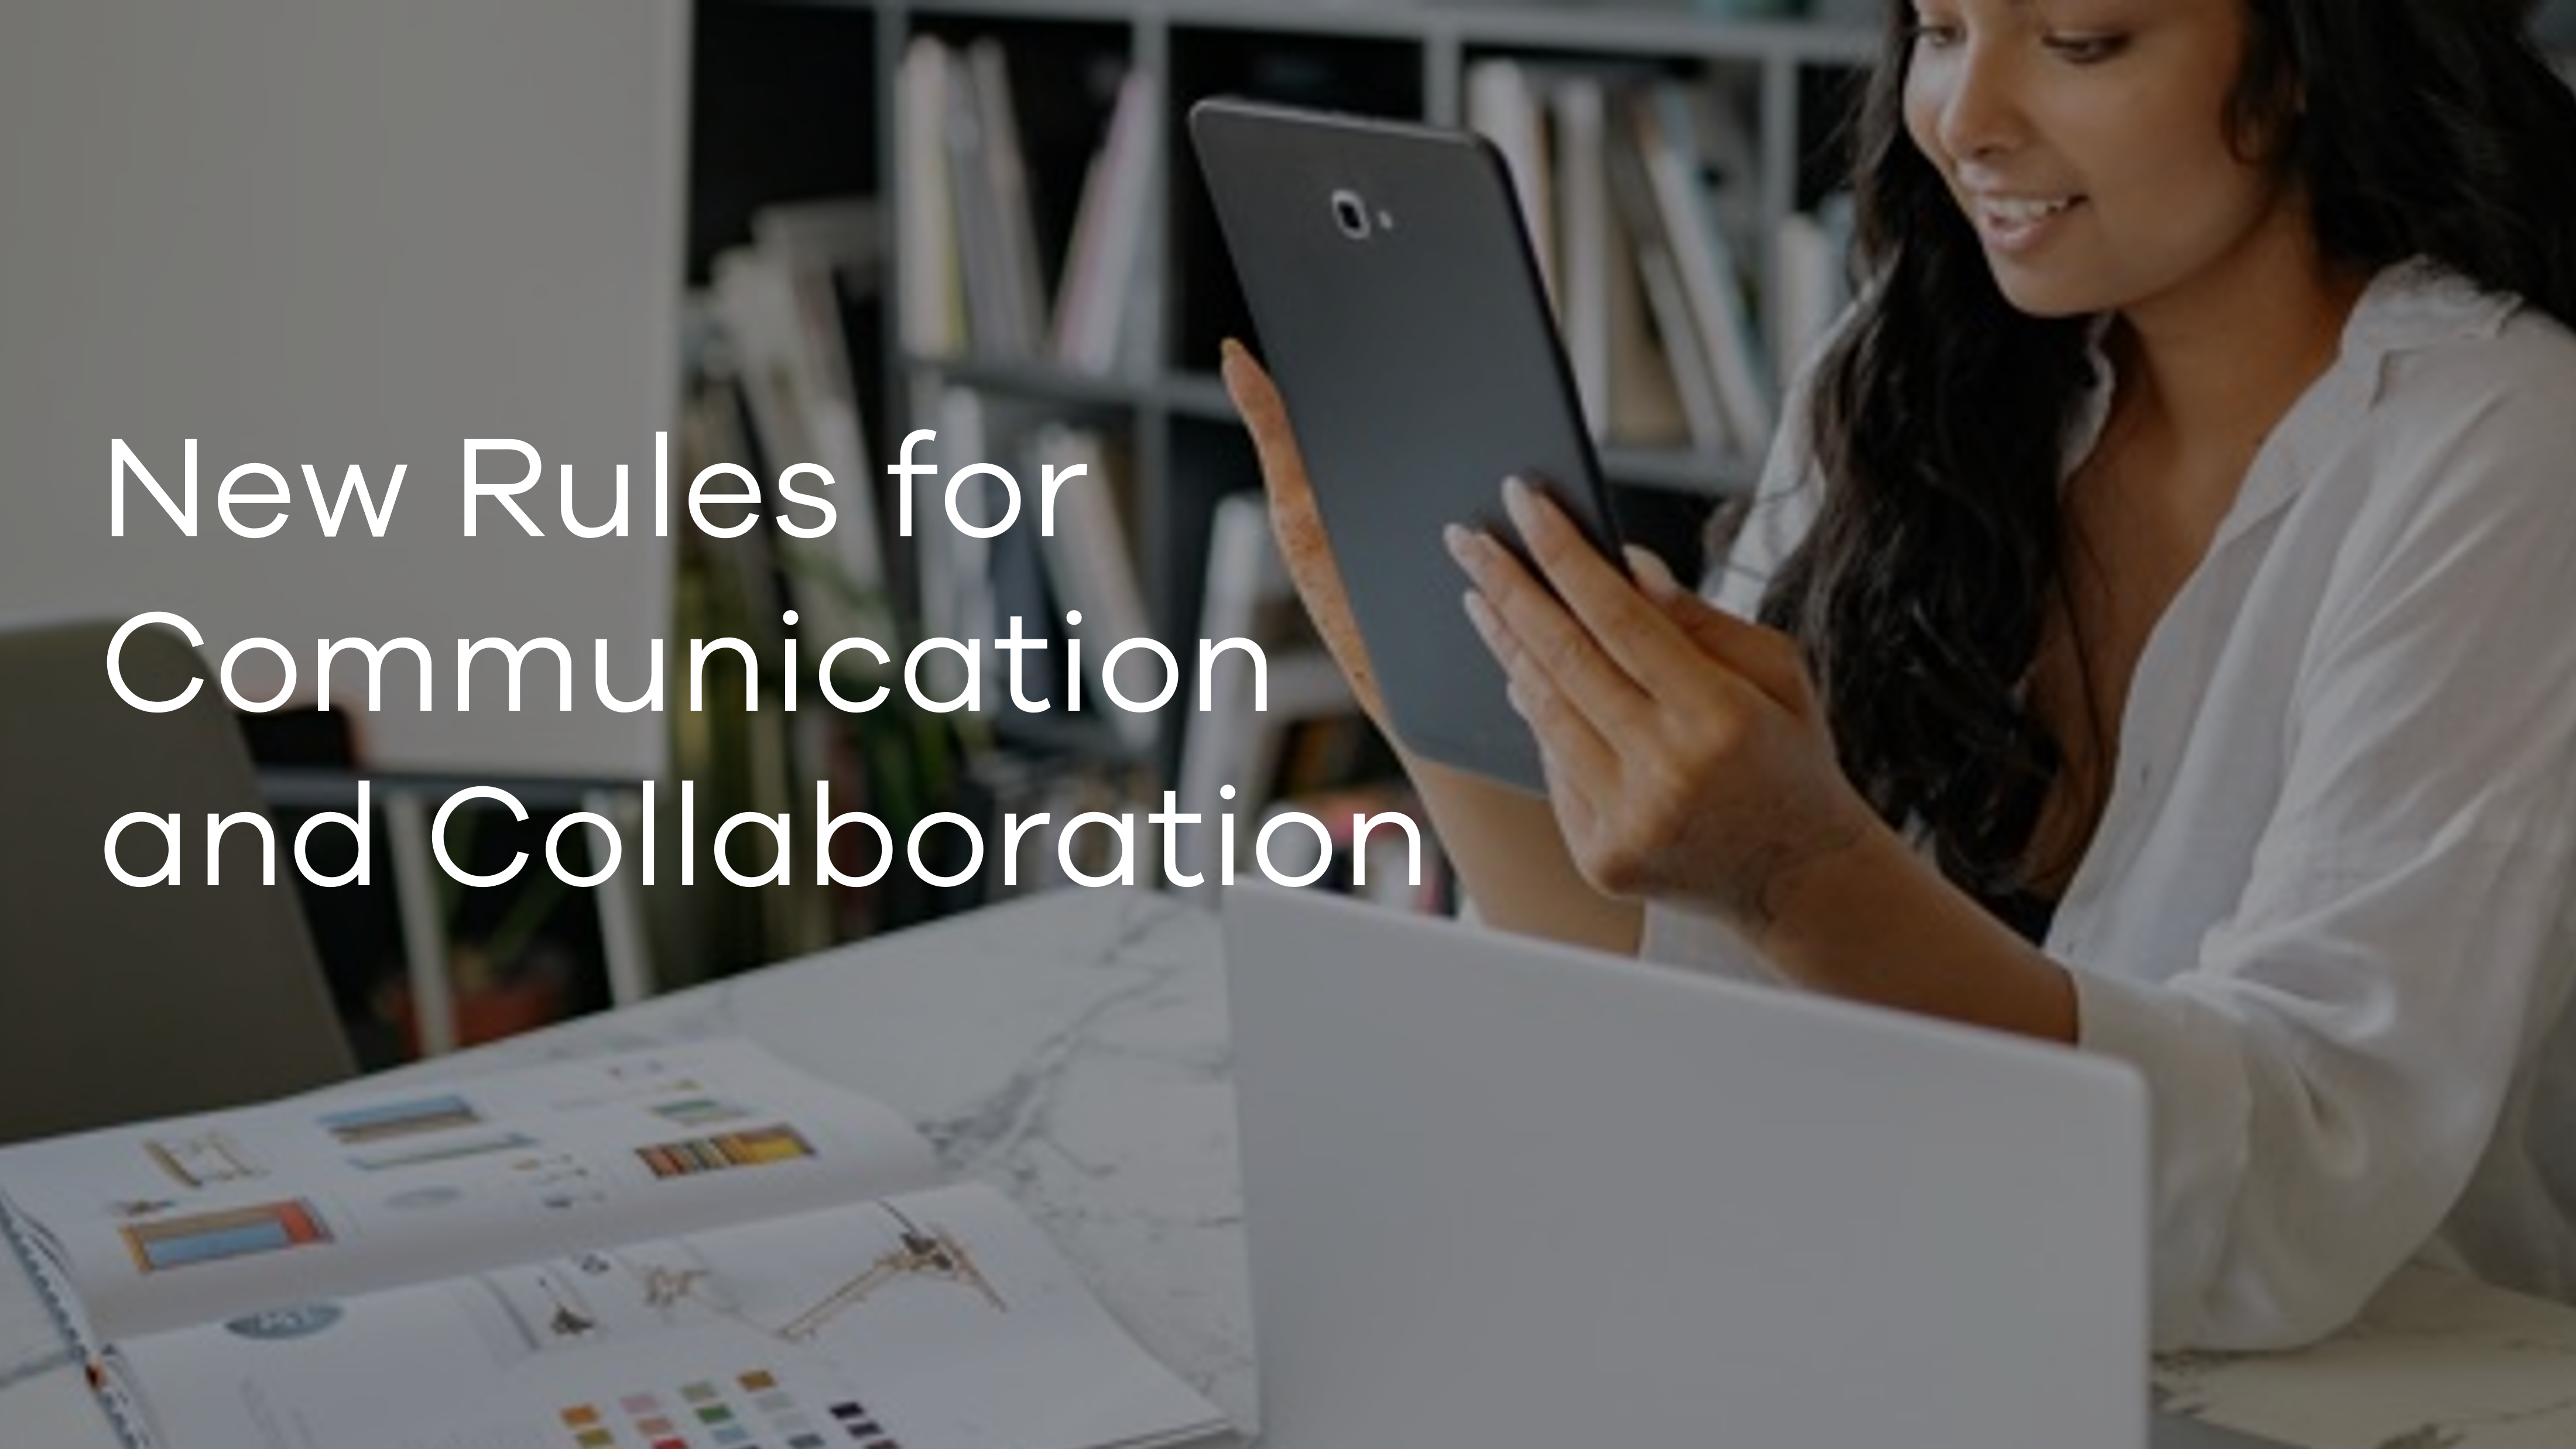 New Rules for Communication and Collaboration CEU